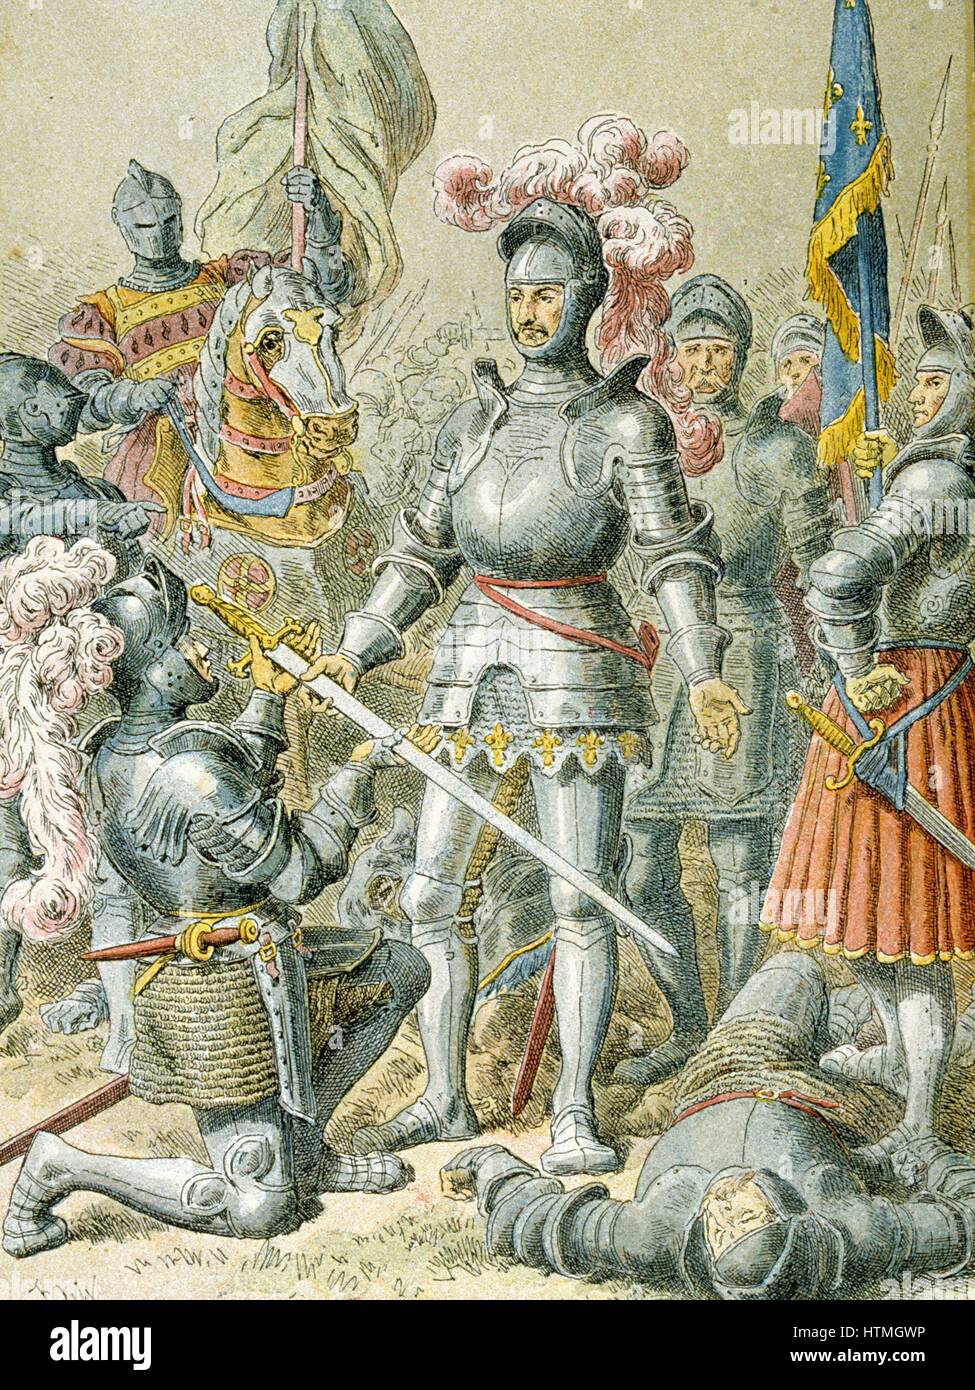 https://c8.alamy.com/comp/HTMGWP/francois-i-1494-1547-king-of-france-from-1515-francois-at-the-battle-HTMGWP.jpg